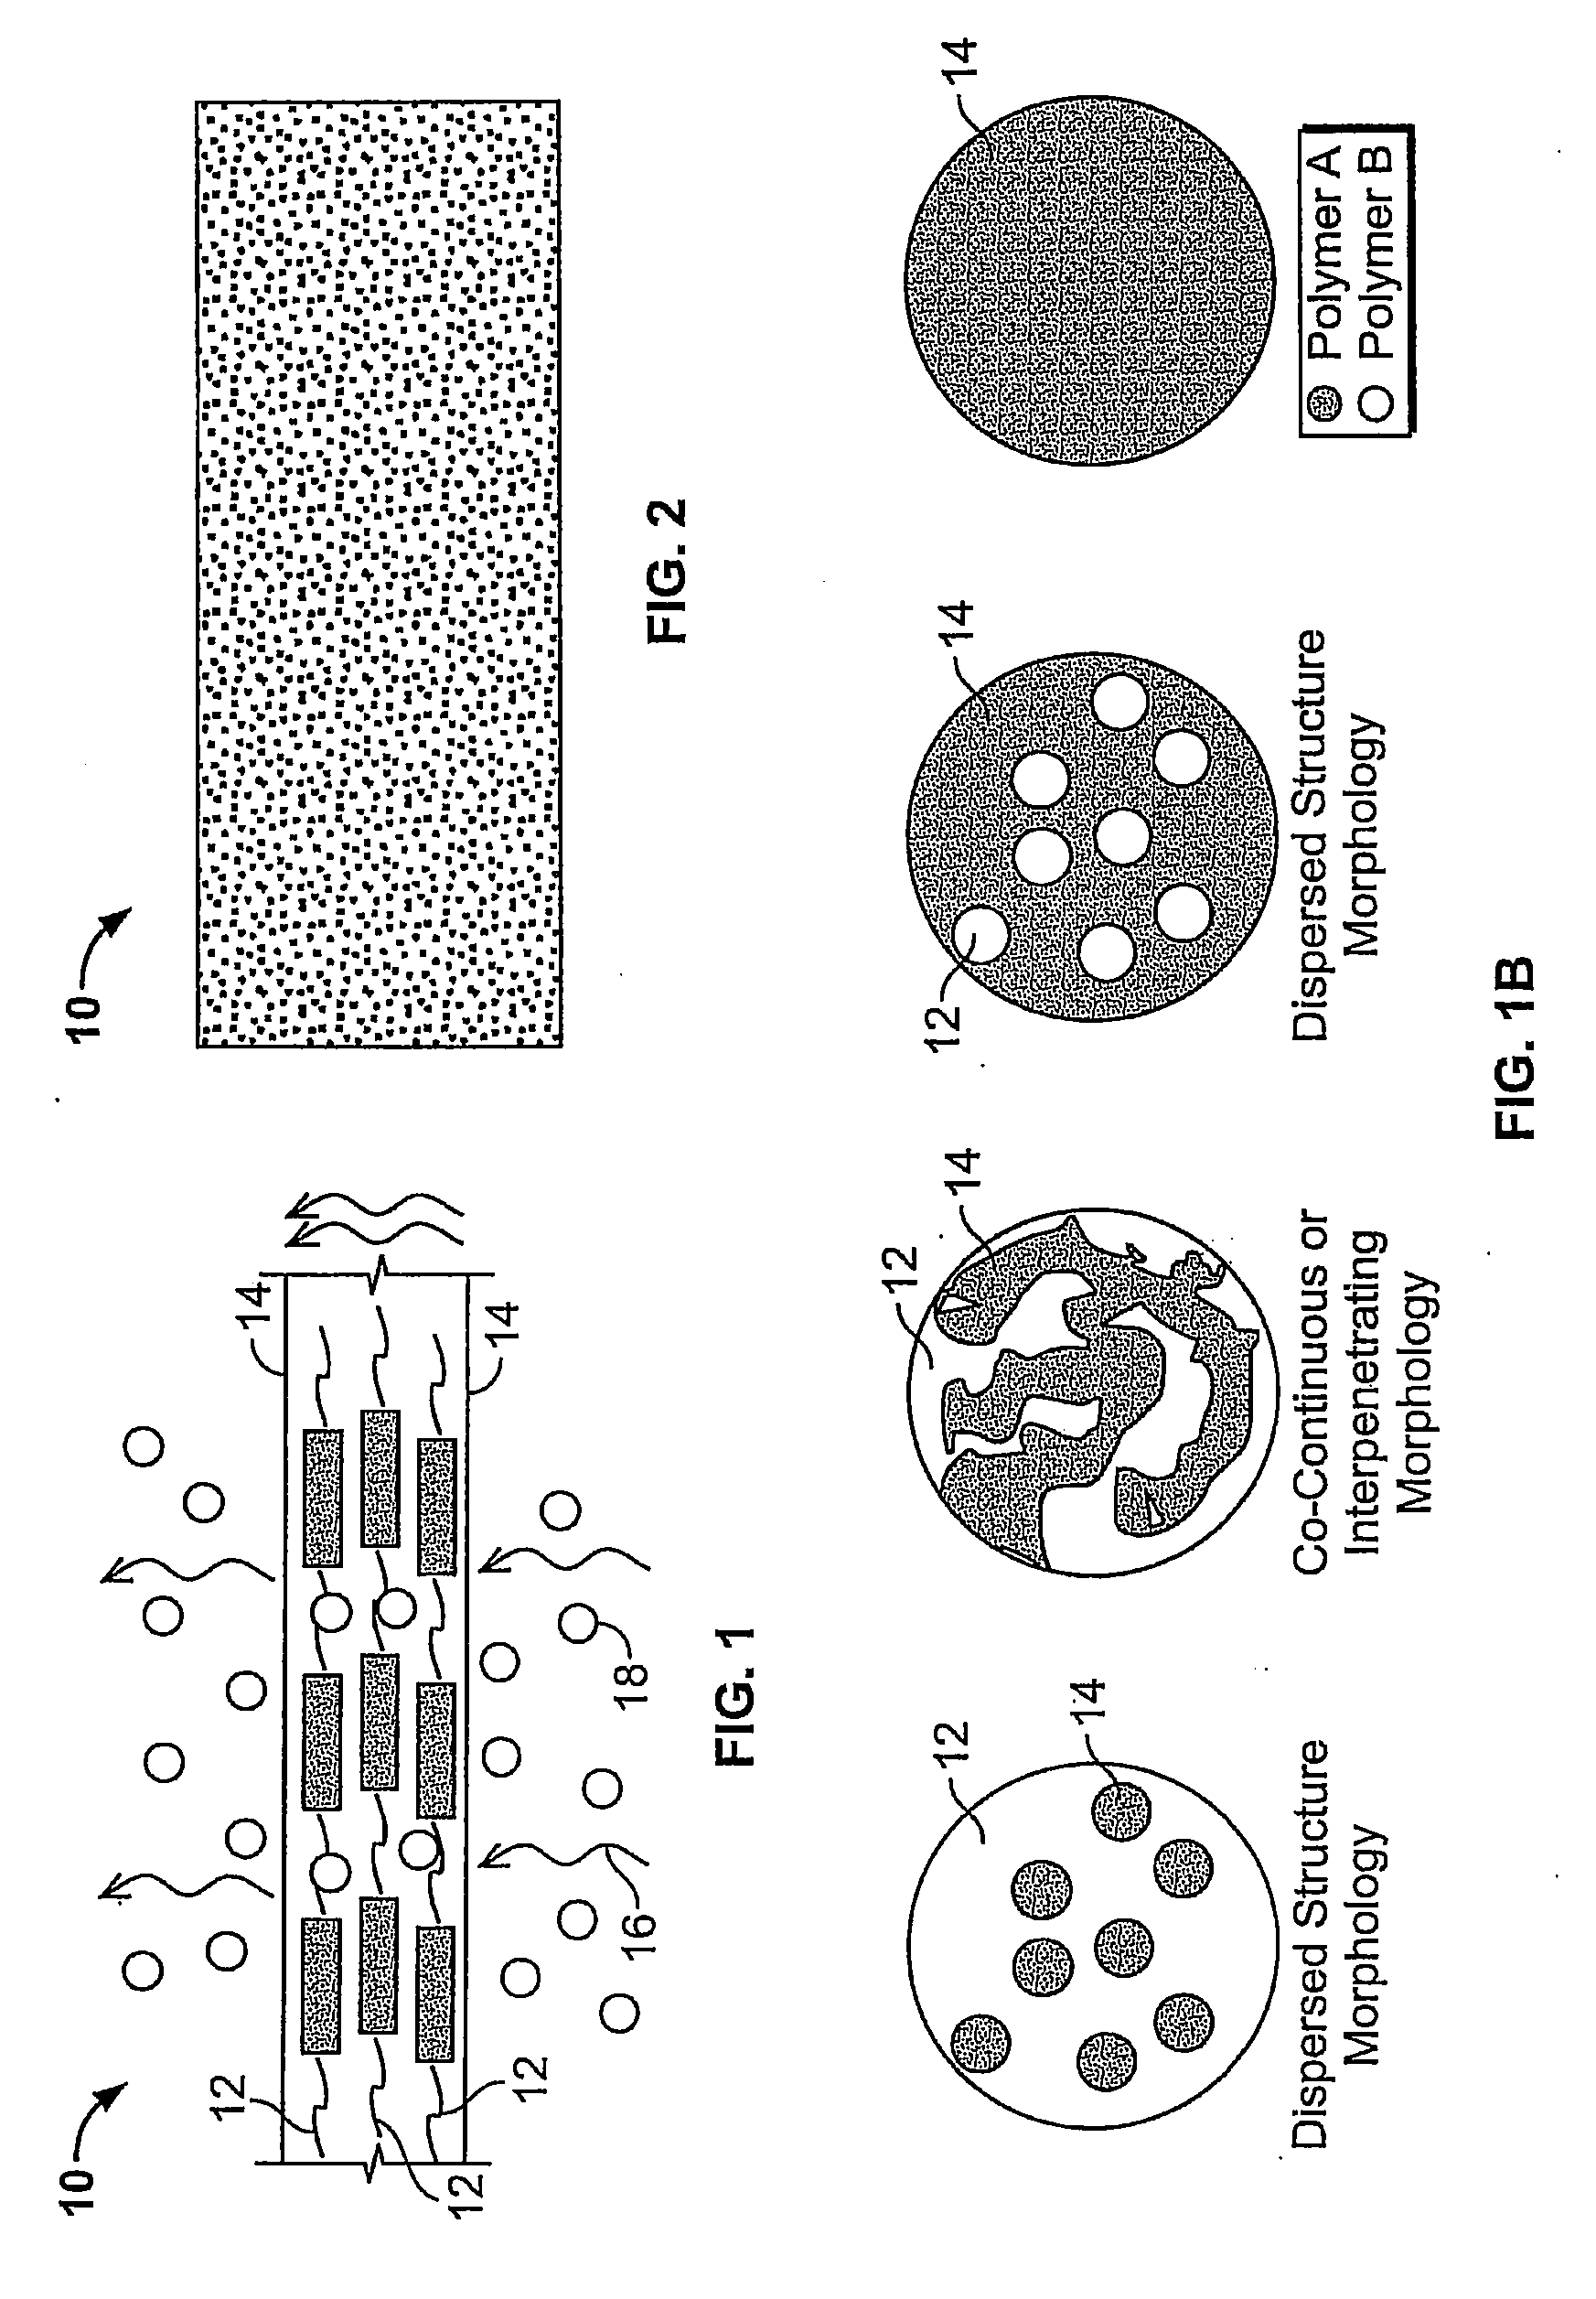 Selectively permeable films